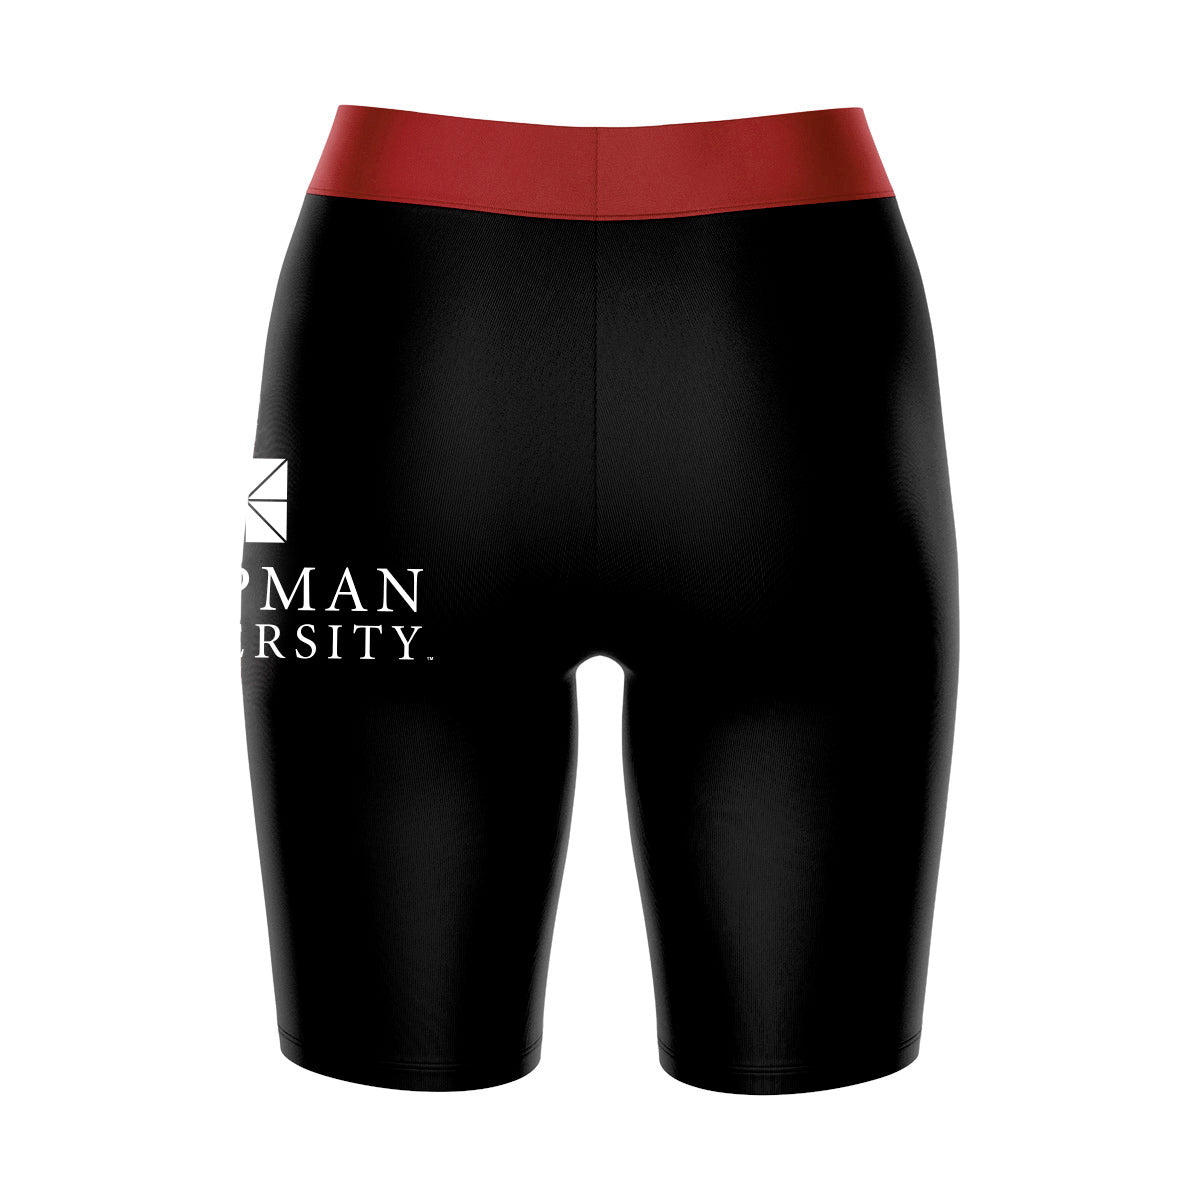 Chapman University Panthers Vive La Fete Game Day Logo on Thigh & Waistband Black and Red Women Bike Short 9 Inseam